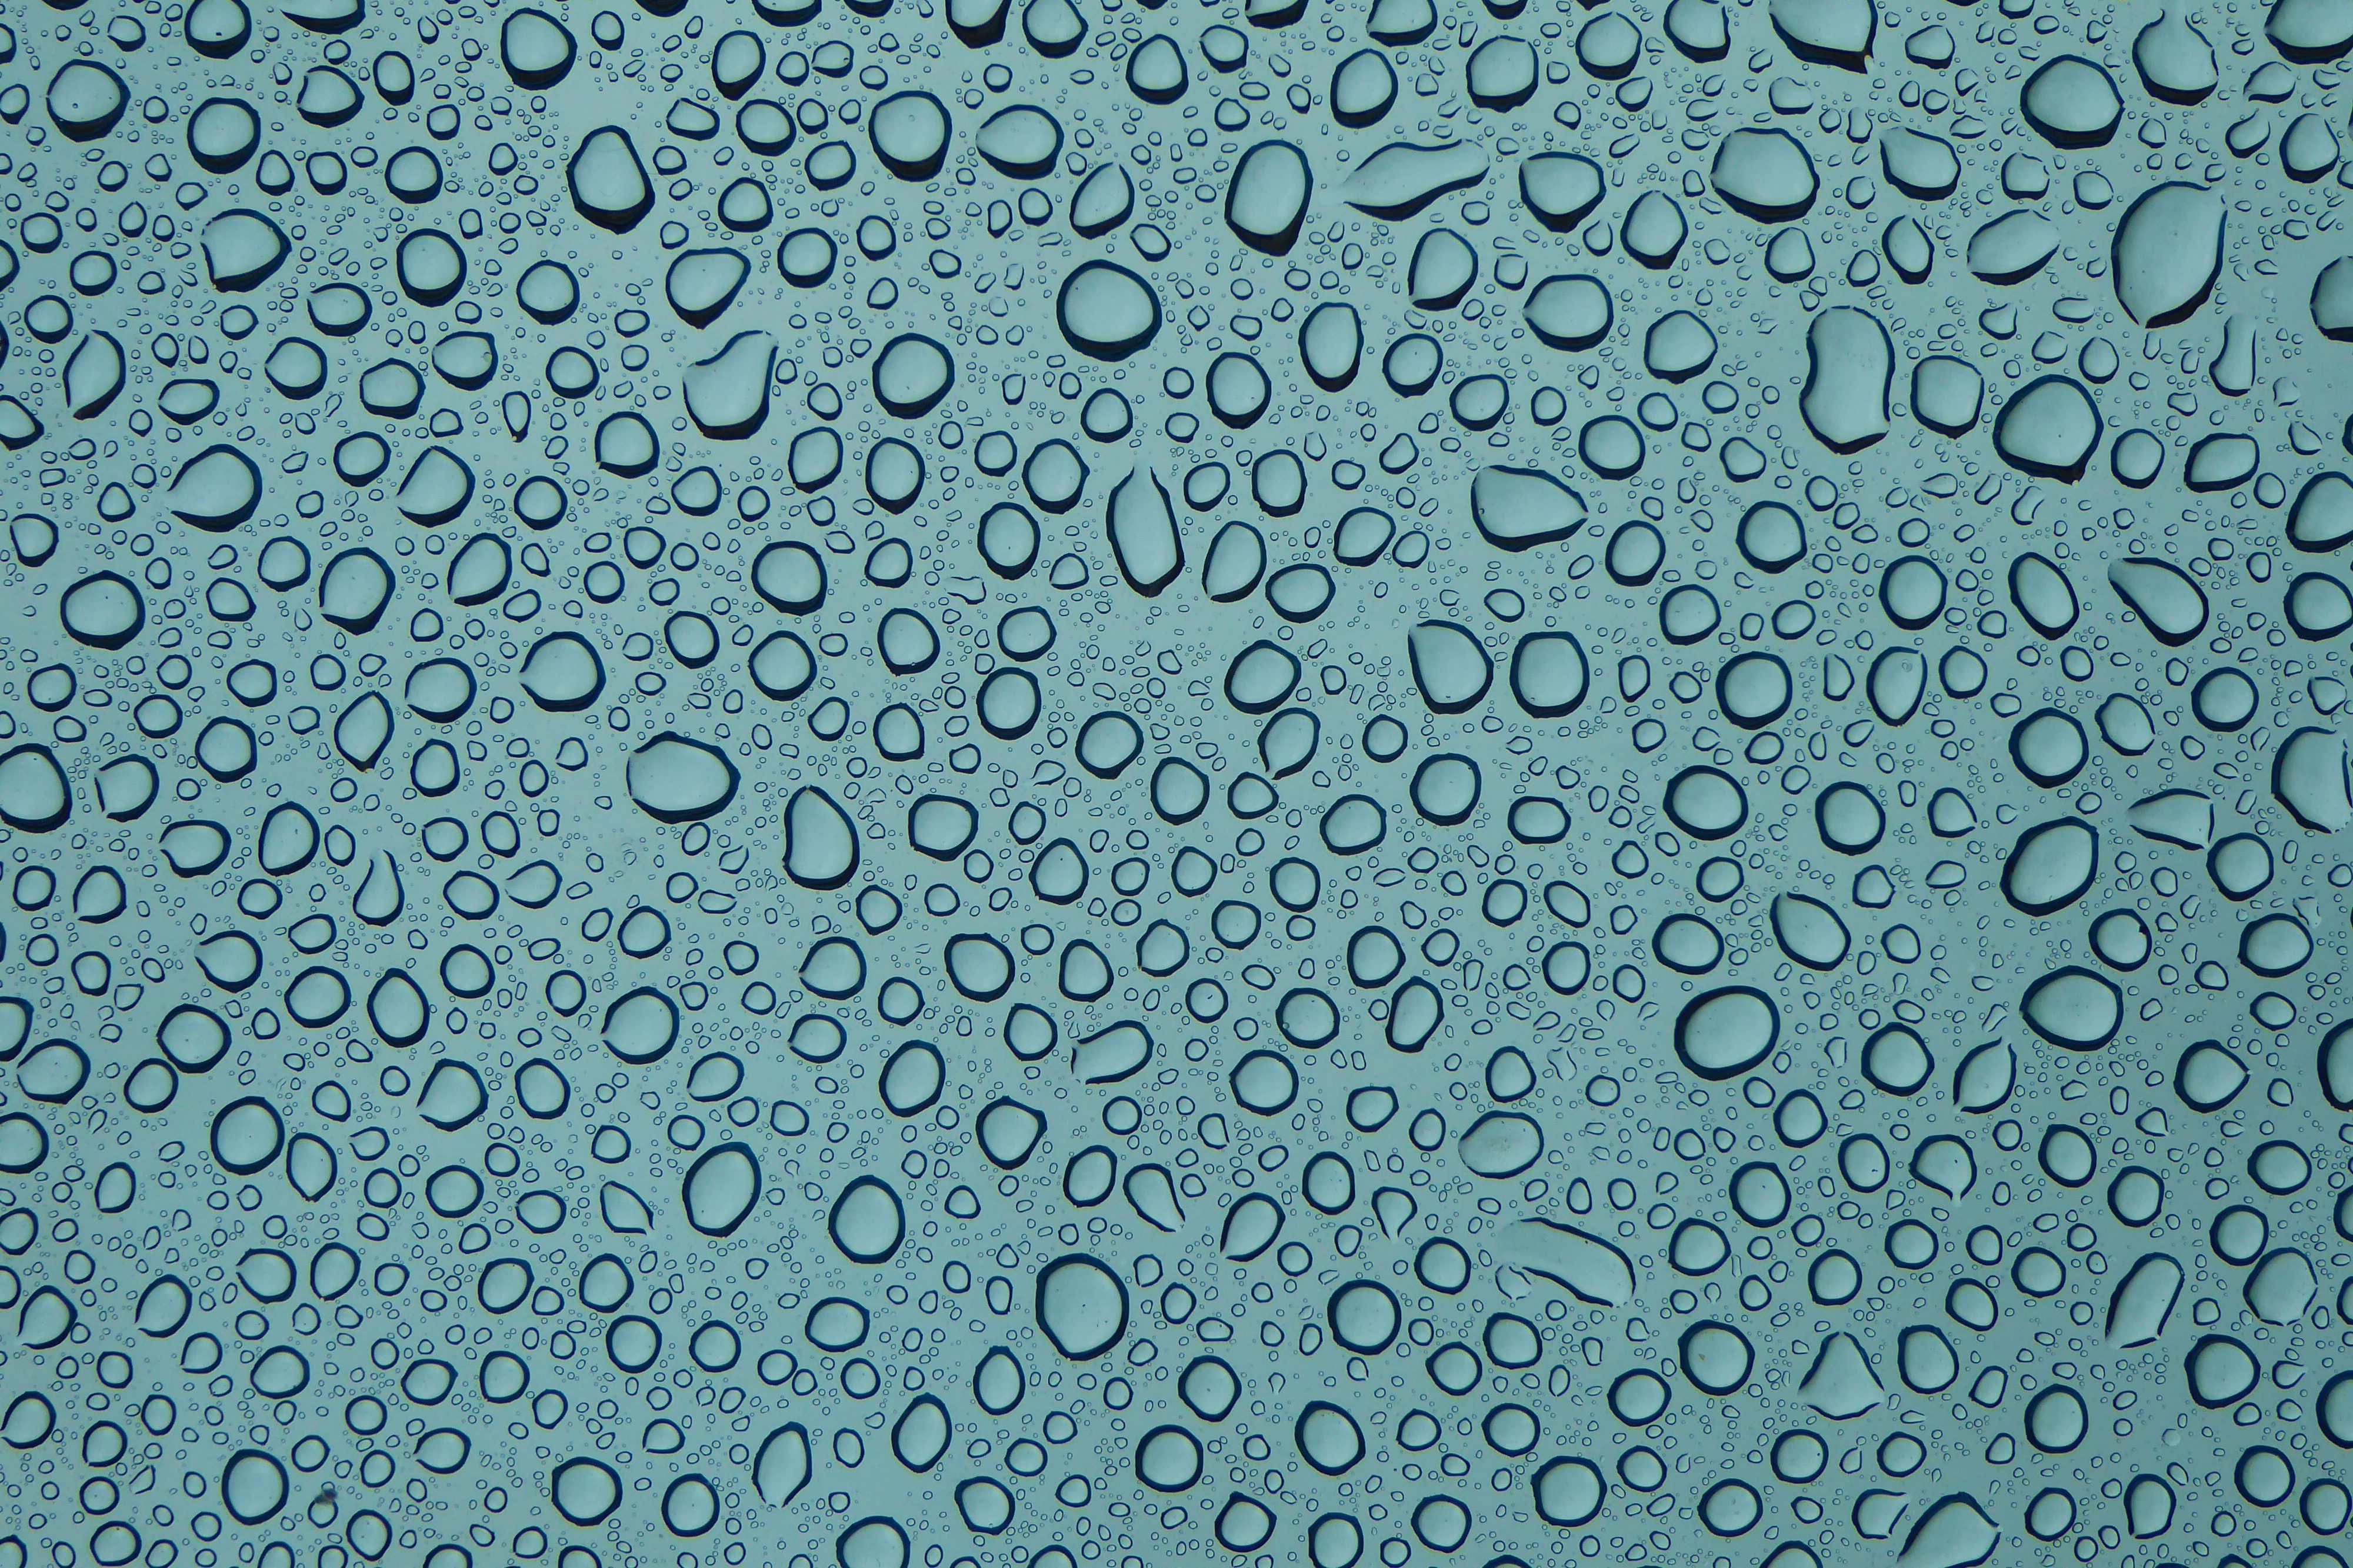 glass, drops, circles, texture, textures, surface, moisture wallpaper for mobile